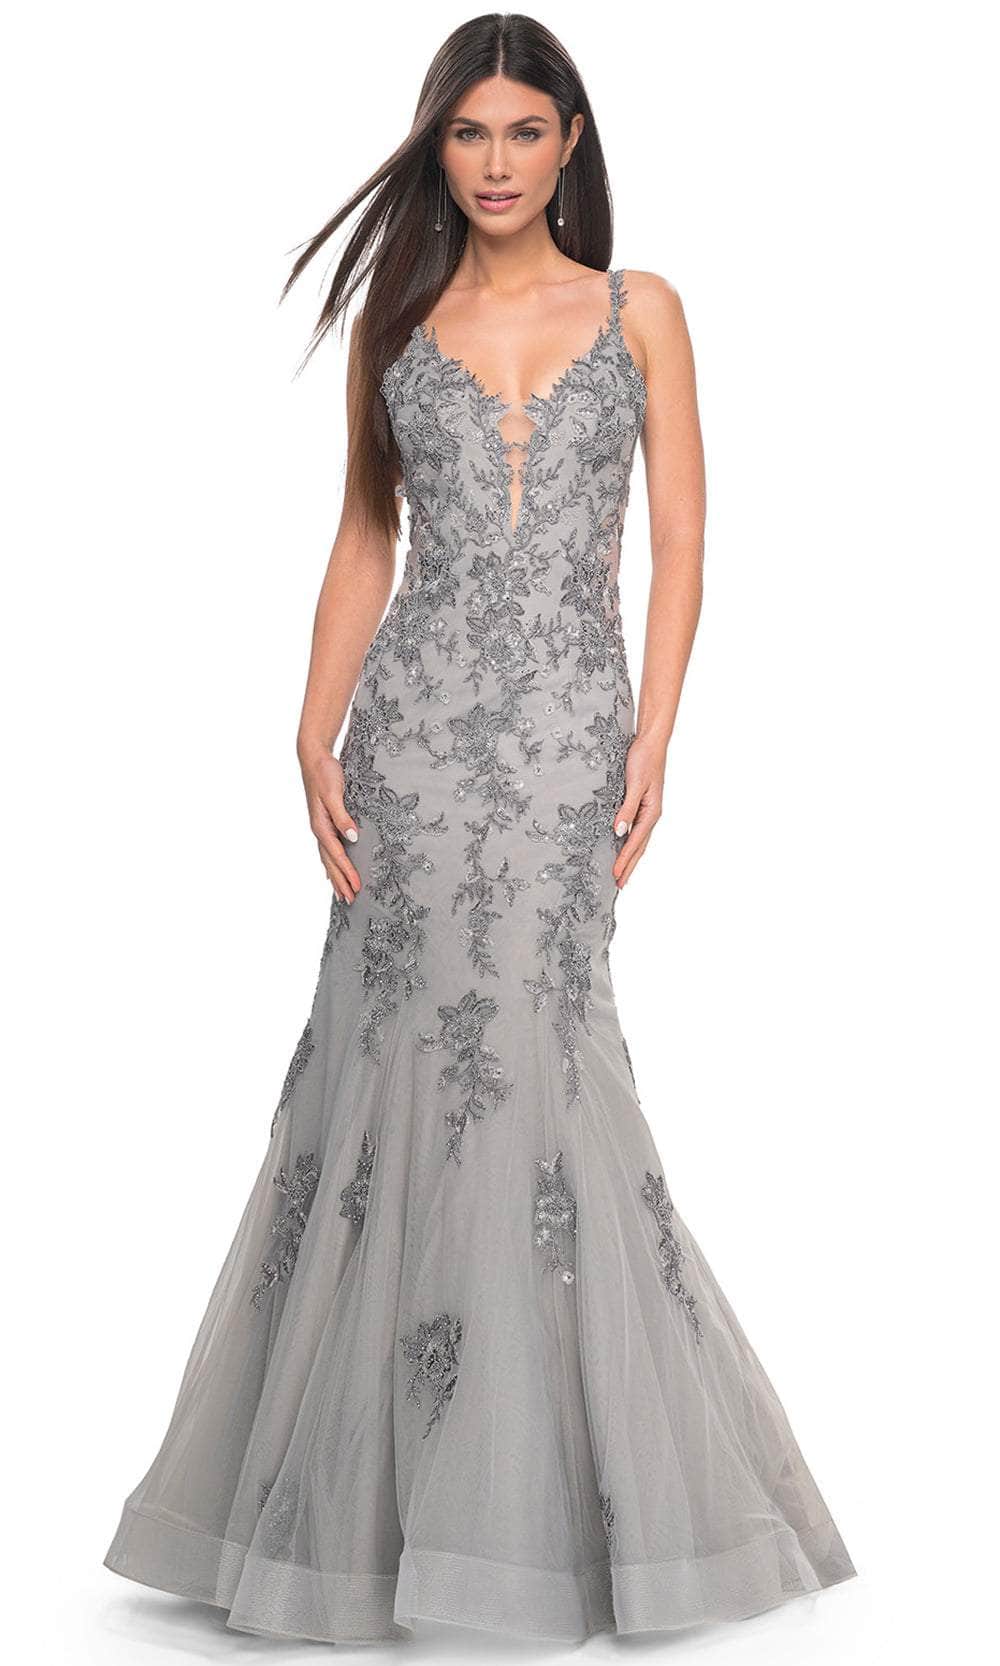 Image of La Femme 32295 - Embroidered Sleeveless Mermaid Prom Gown